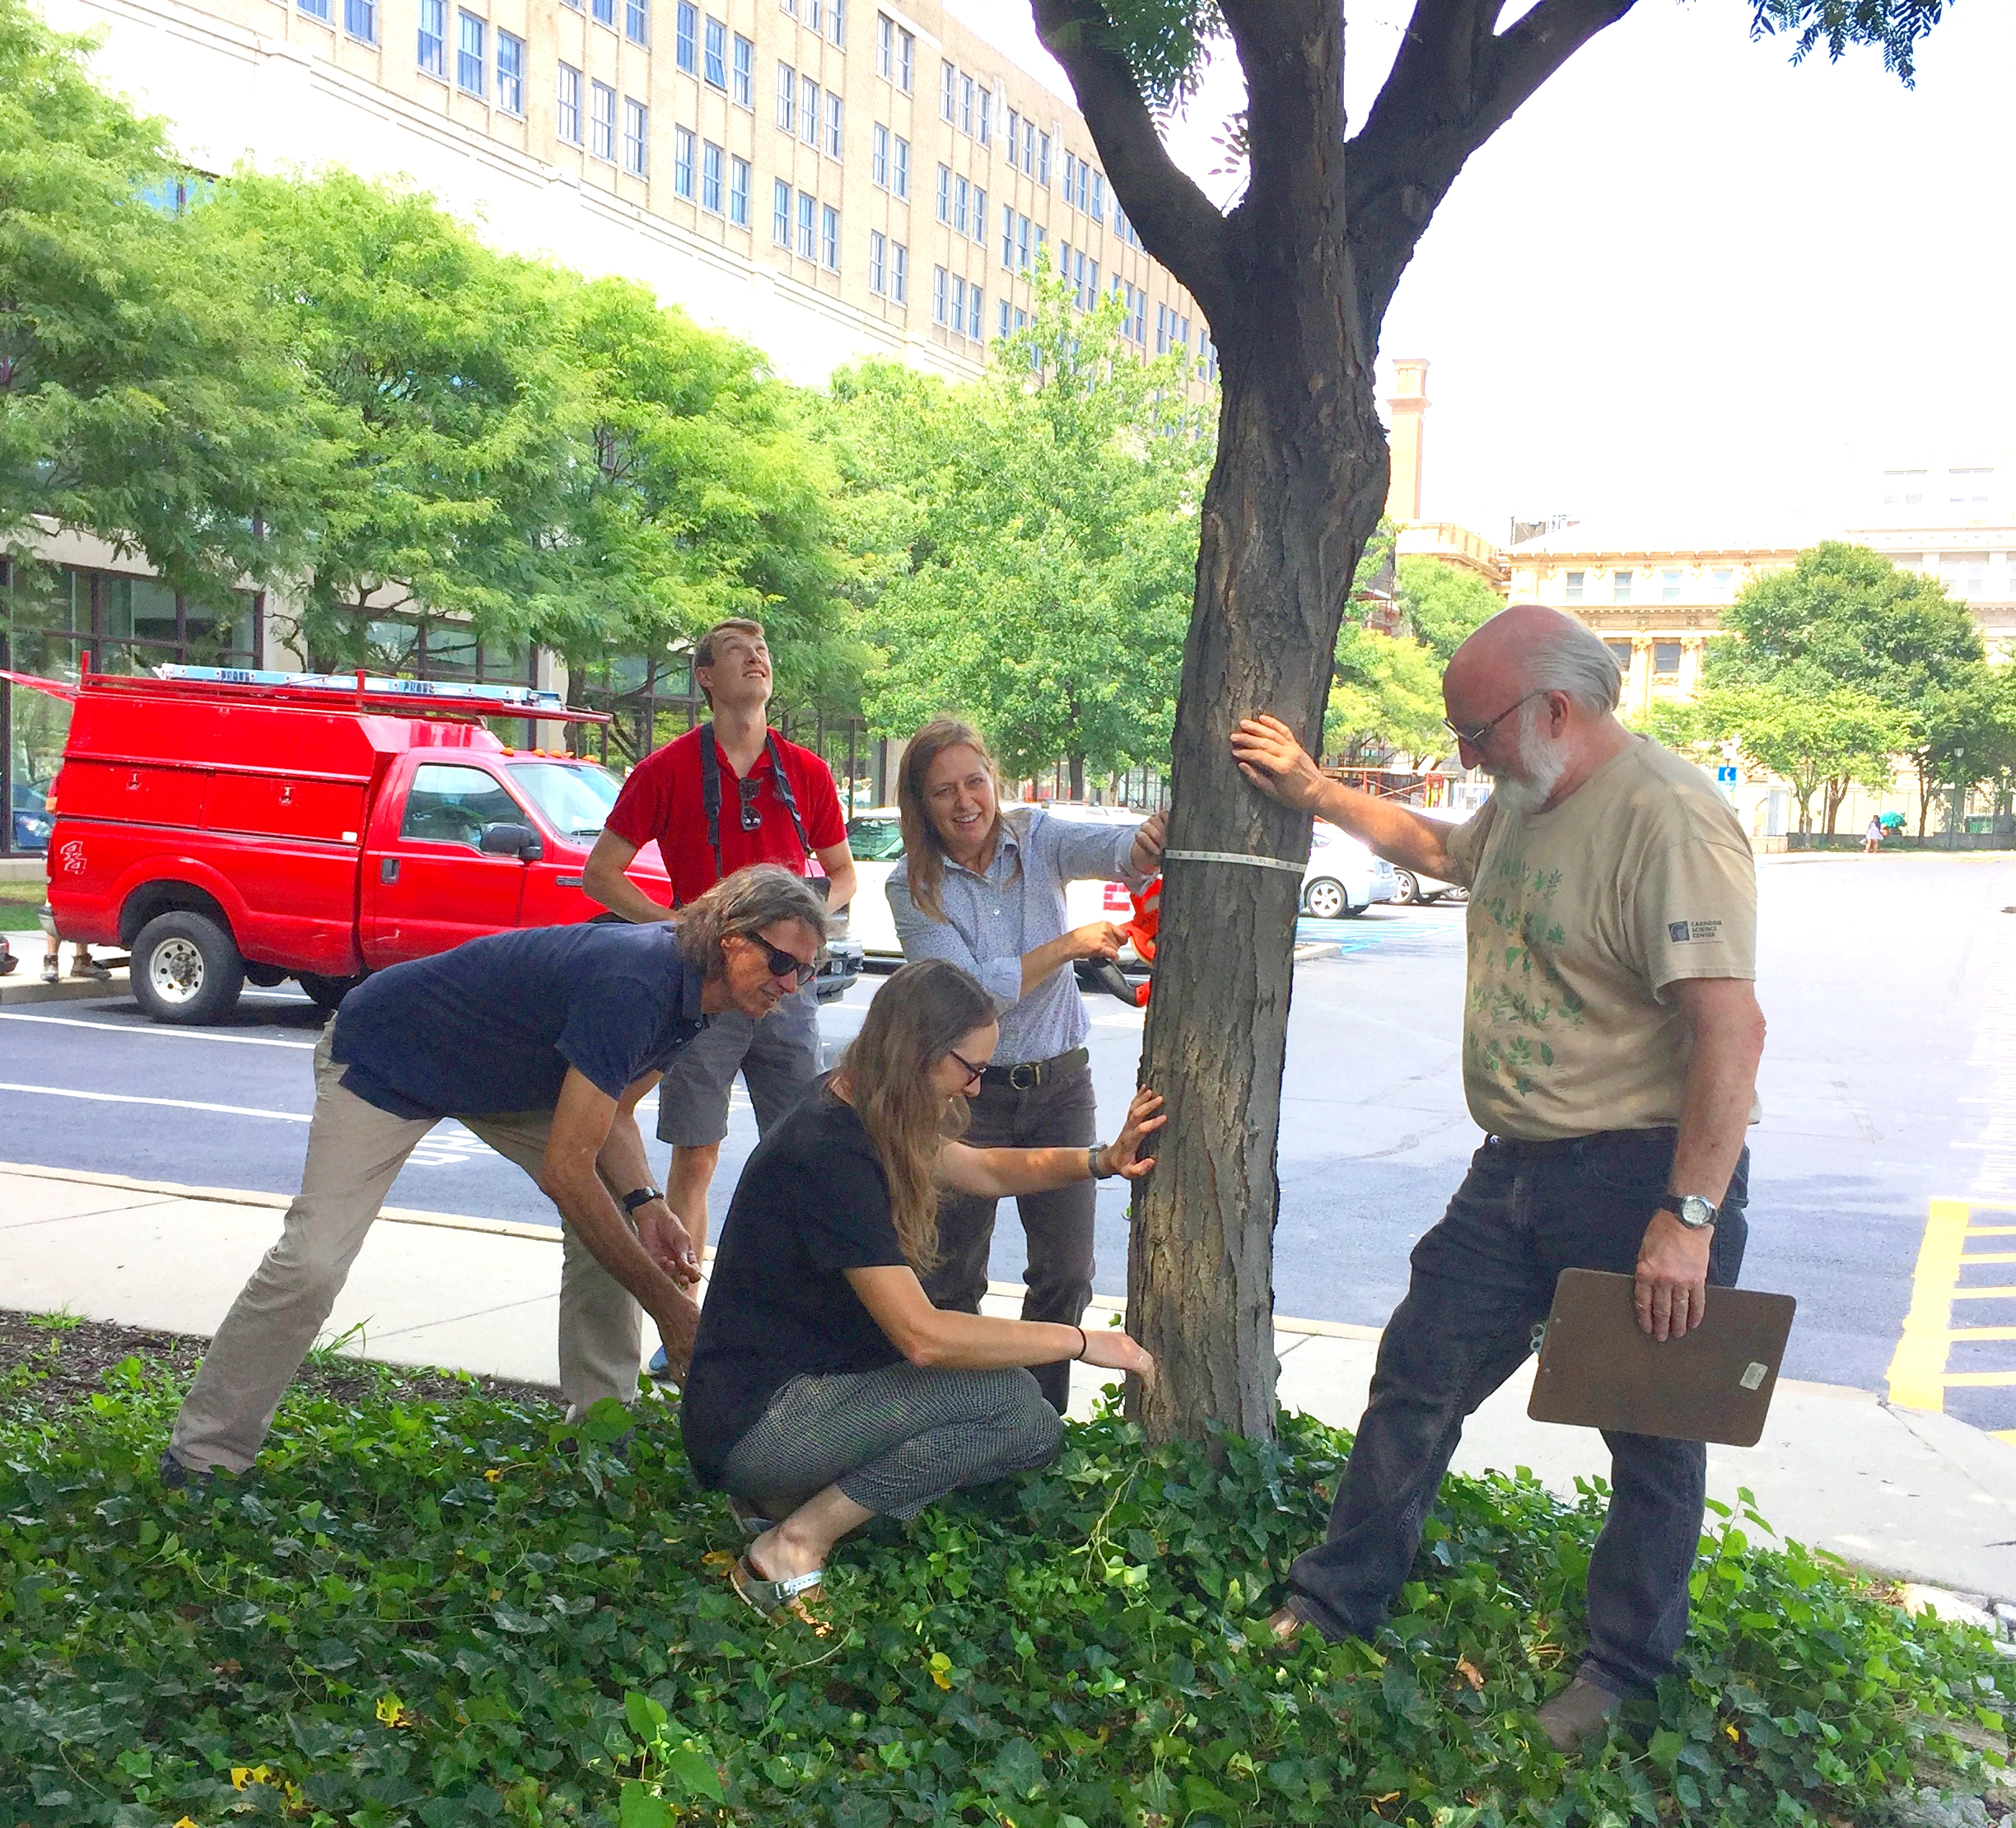 A group inspects and measures a tree